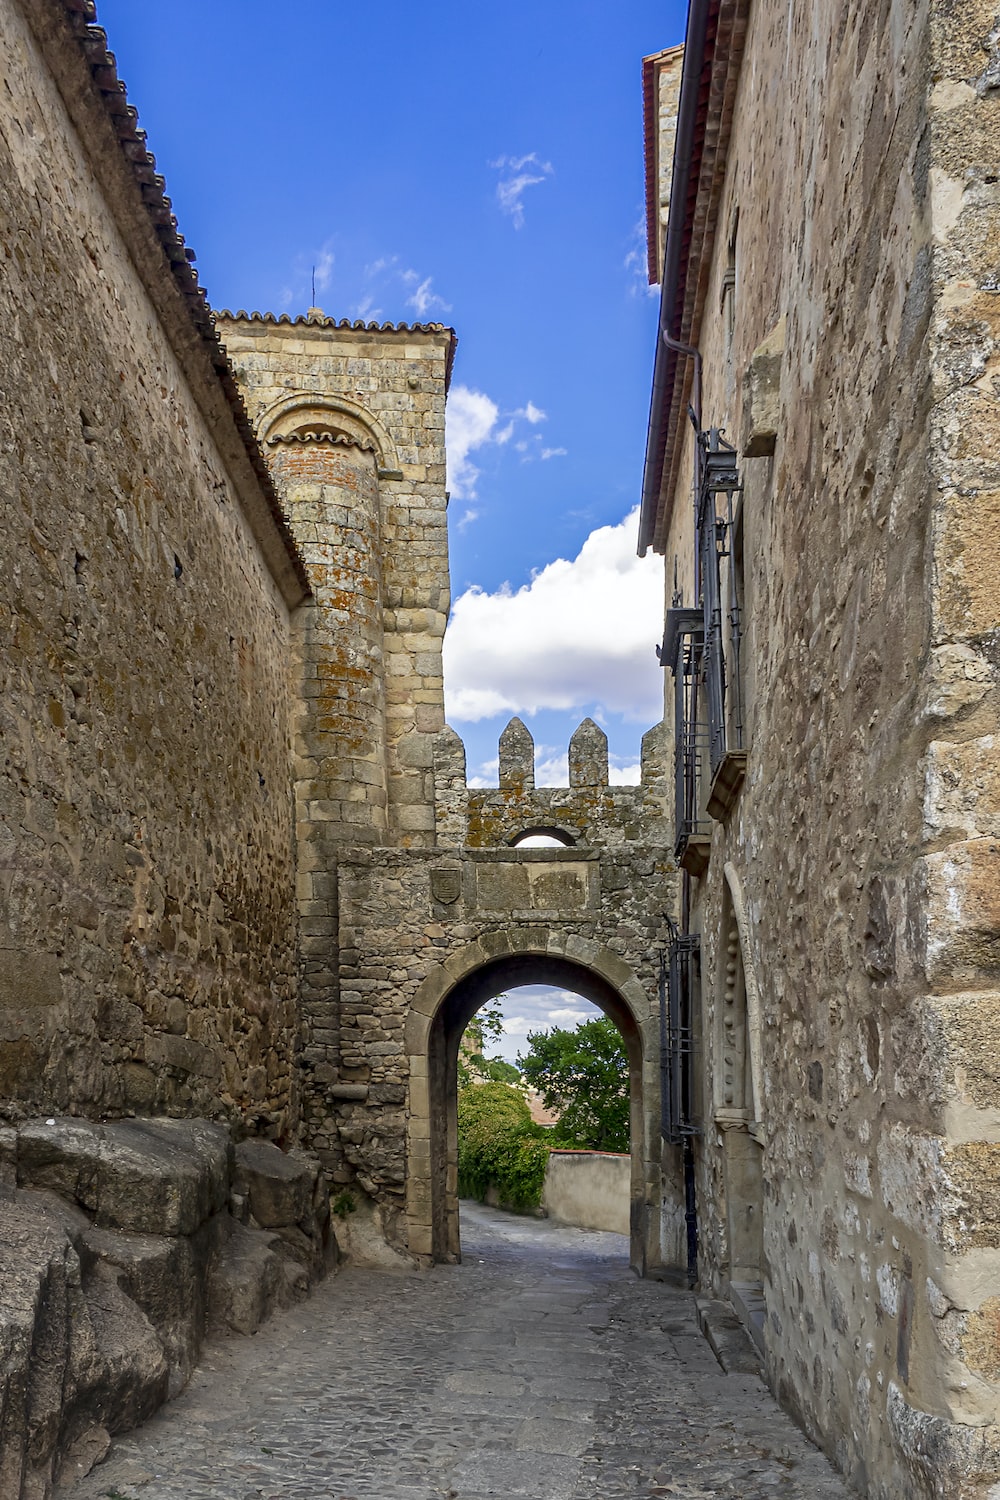 a narrow street with a stone archway between two buildings